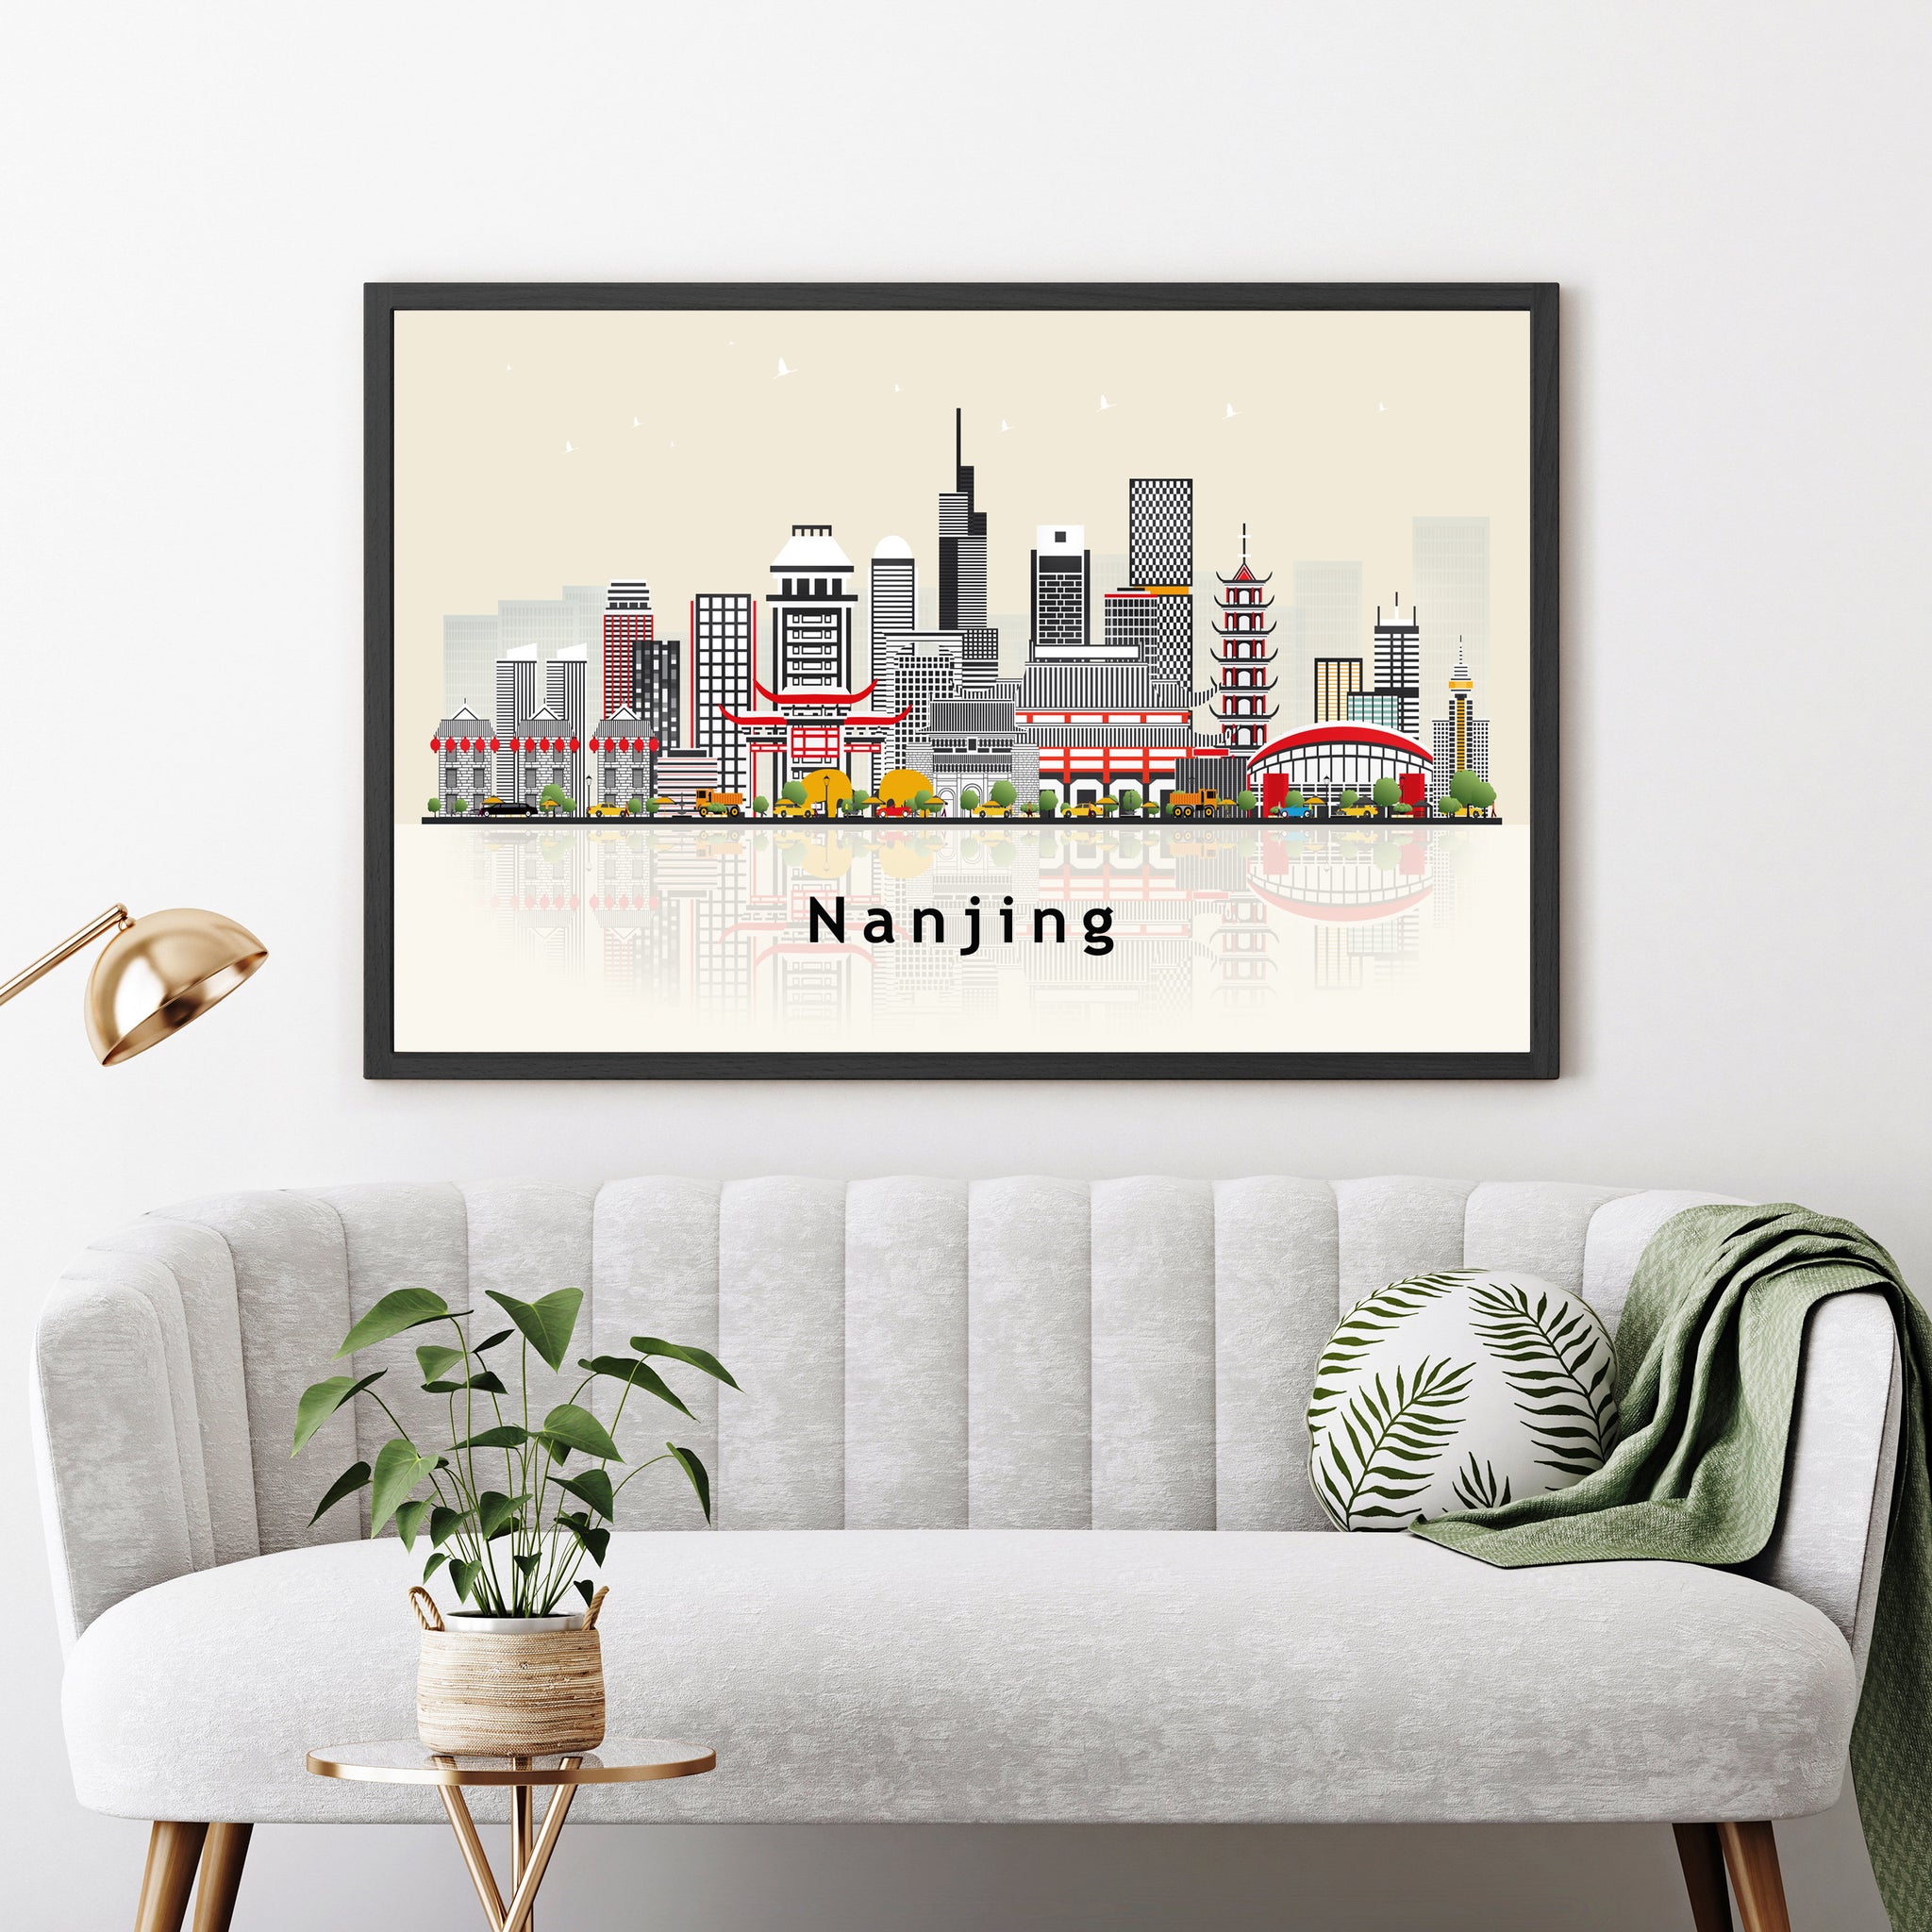 NANJING CHINA Illustration skyline poster, Modern skyline cityscape poster, China city skyline landmark map poster, Home wall decoration